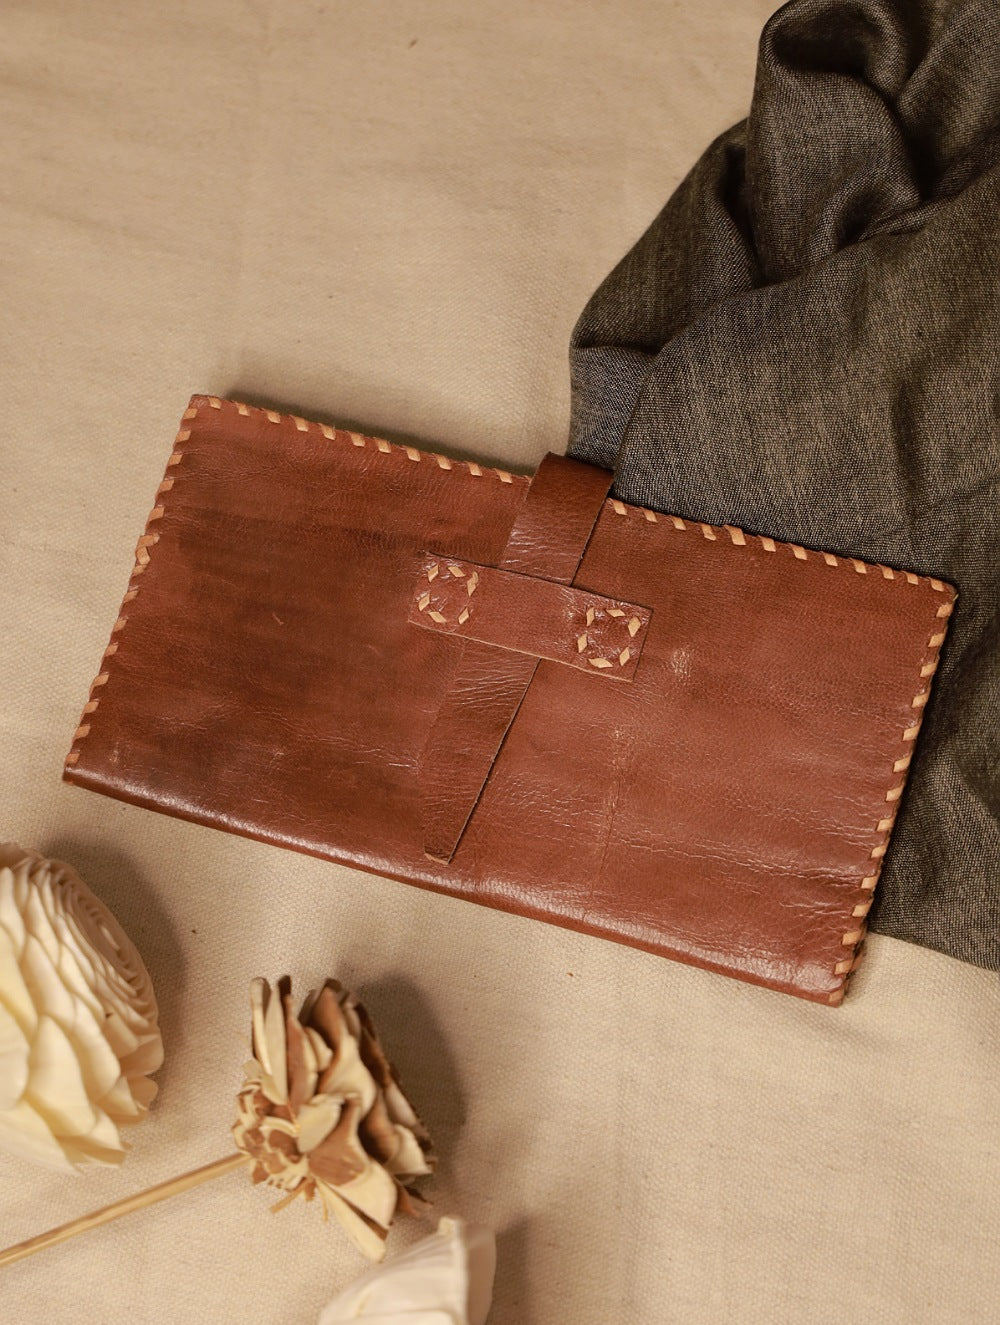 Load image into Gallery viewer, Handcrafted Jawaja Leather Wallet - Brown